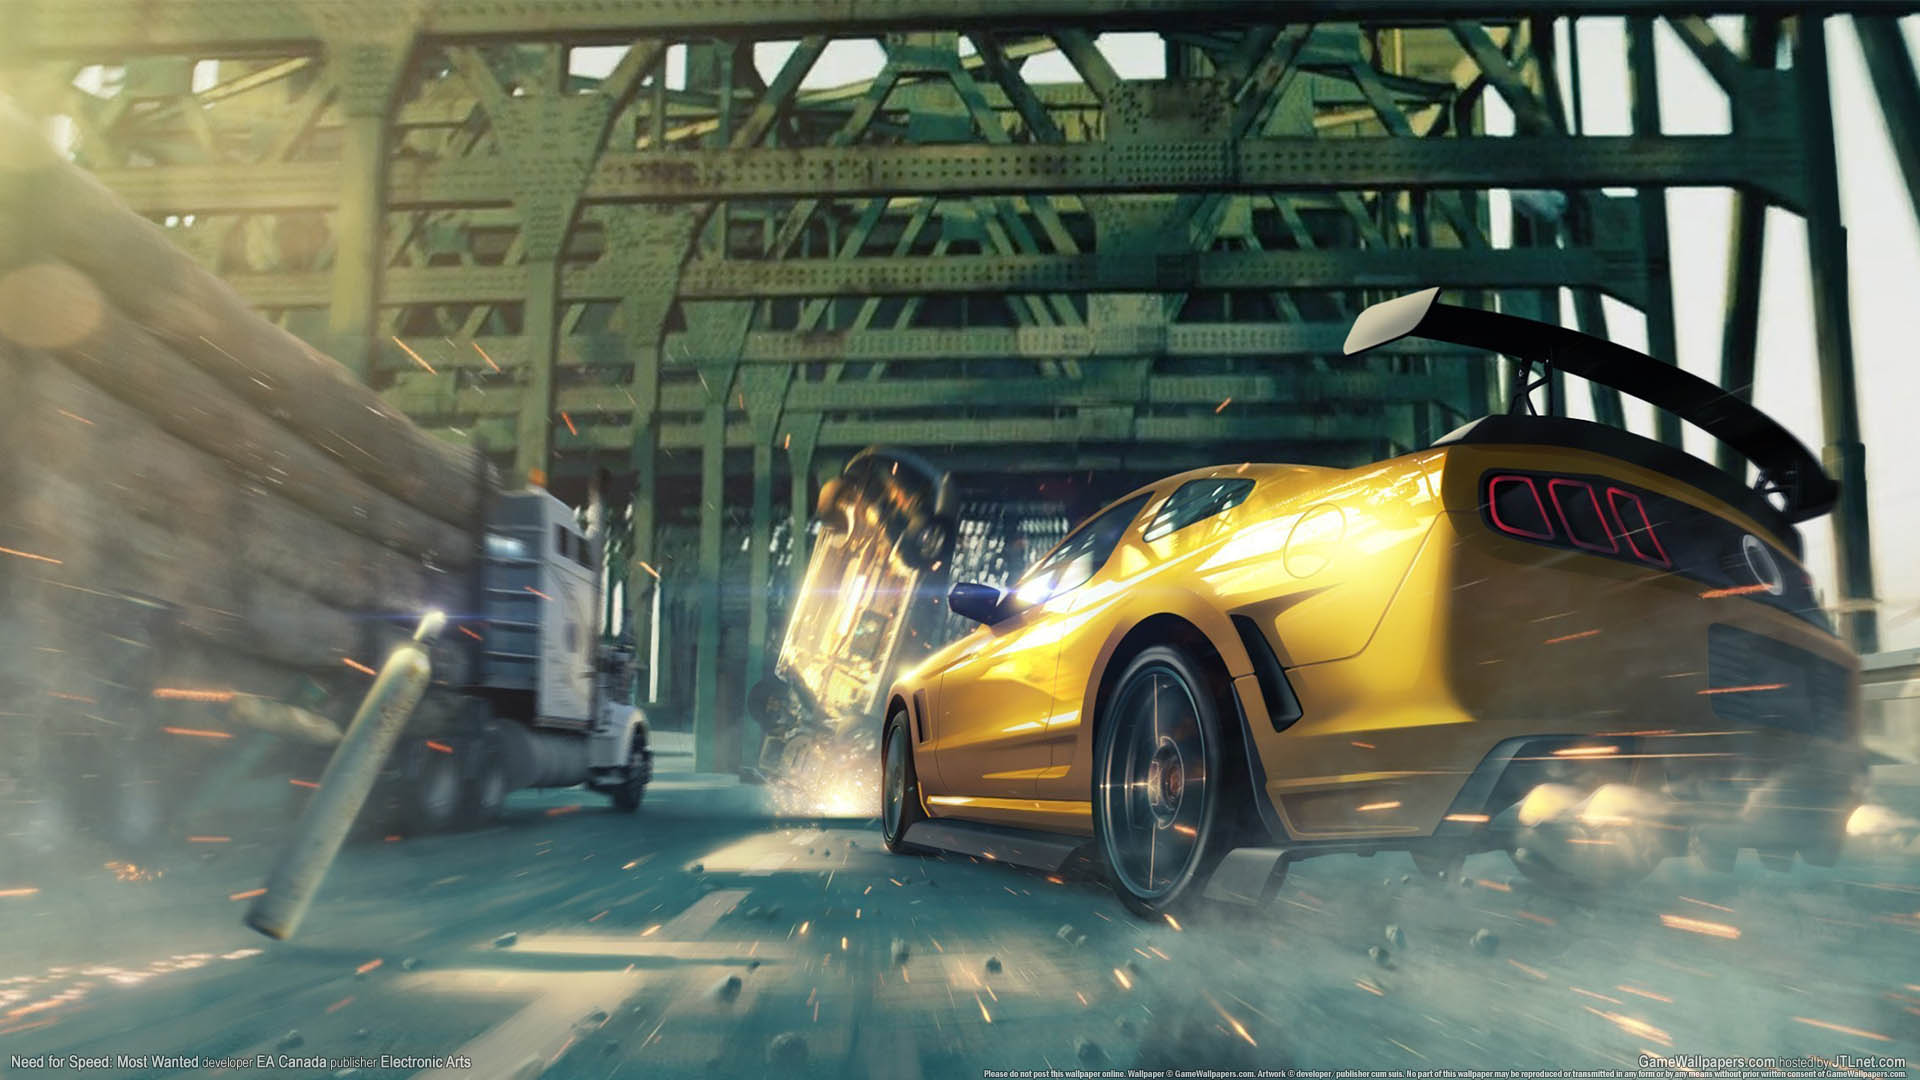 Need for Speed - Most Wanted fond d'cran 07 1920x1080